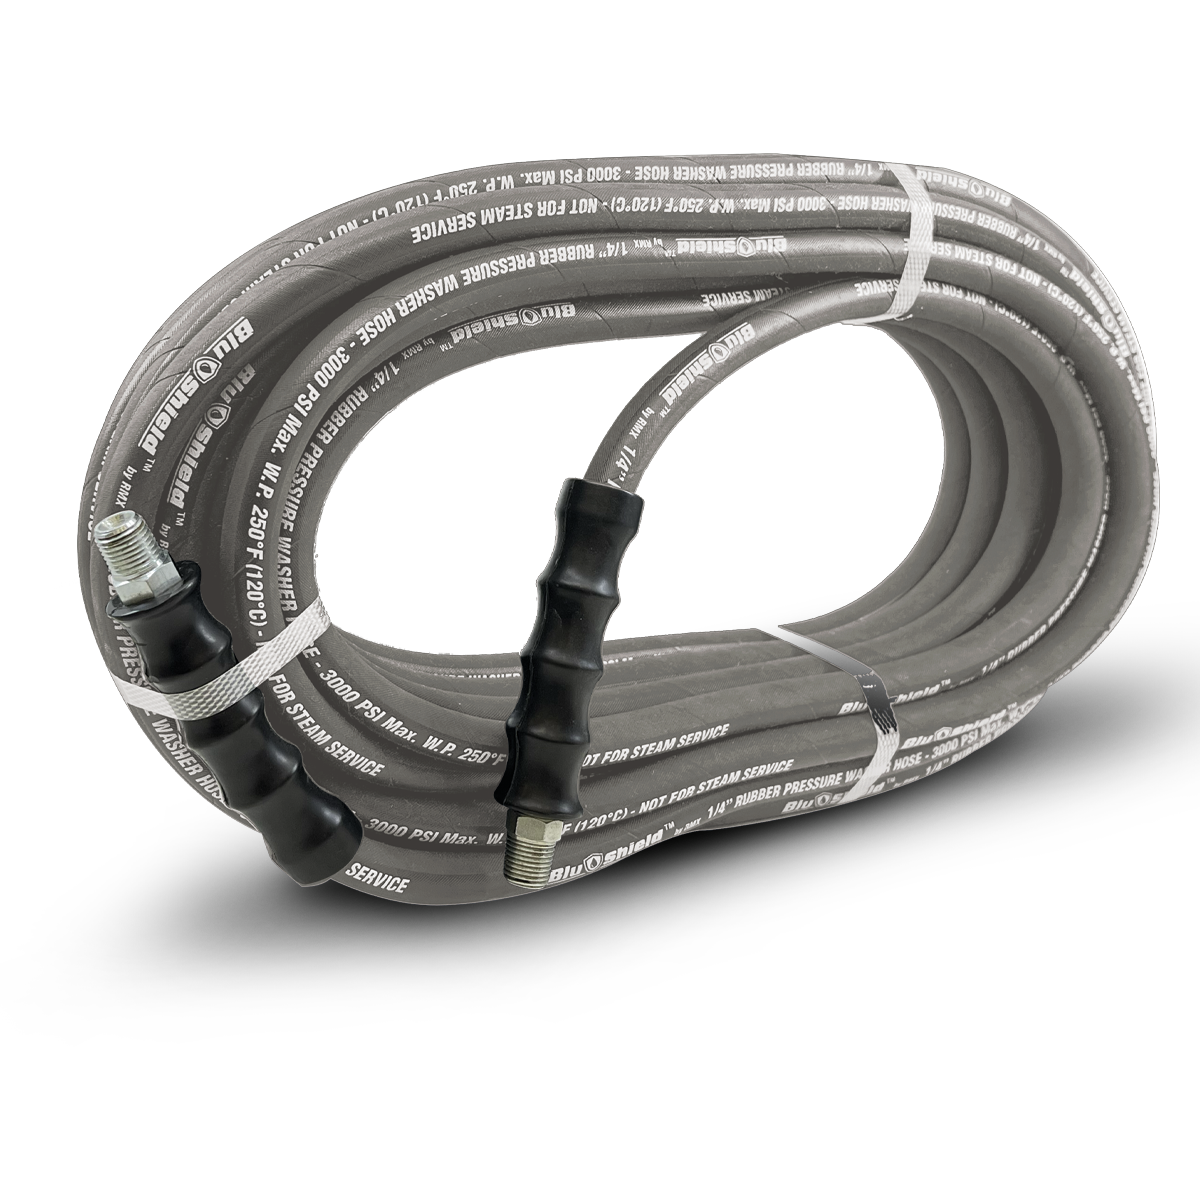 BluShield Lightweight 1/4" Polyester Braided  Rubber Pressure Washer Hose with M22 Fittings, 3100PSI